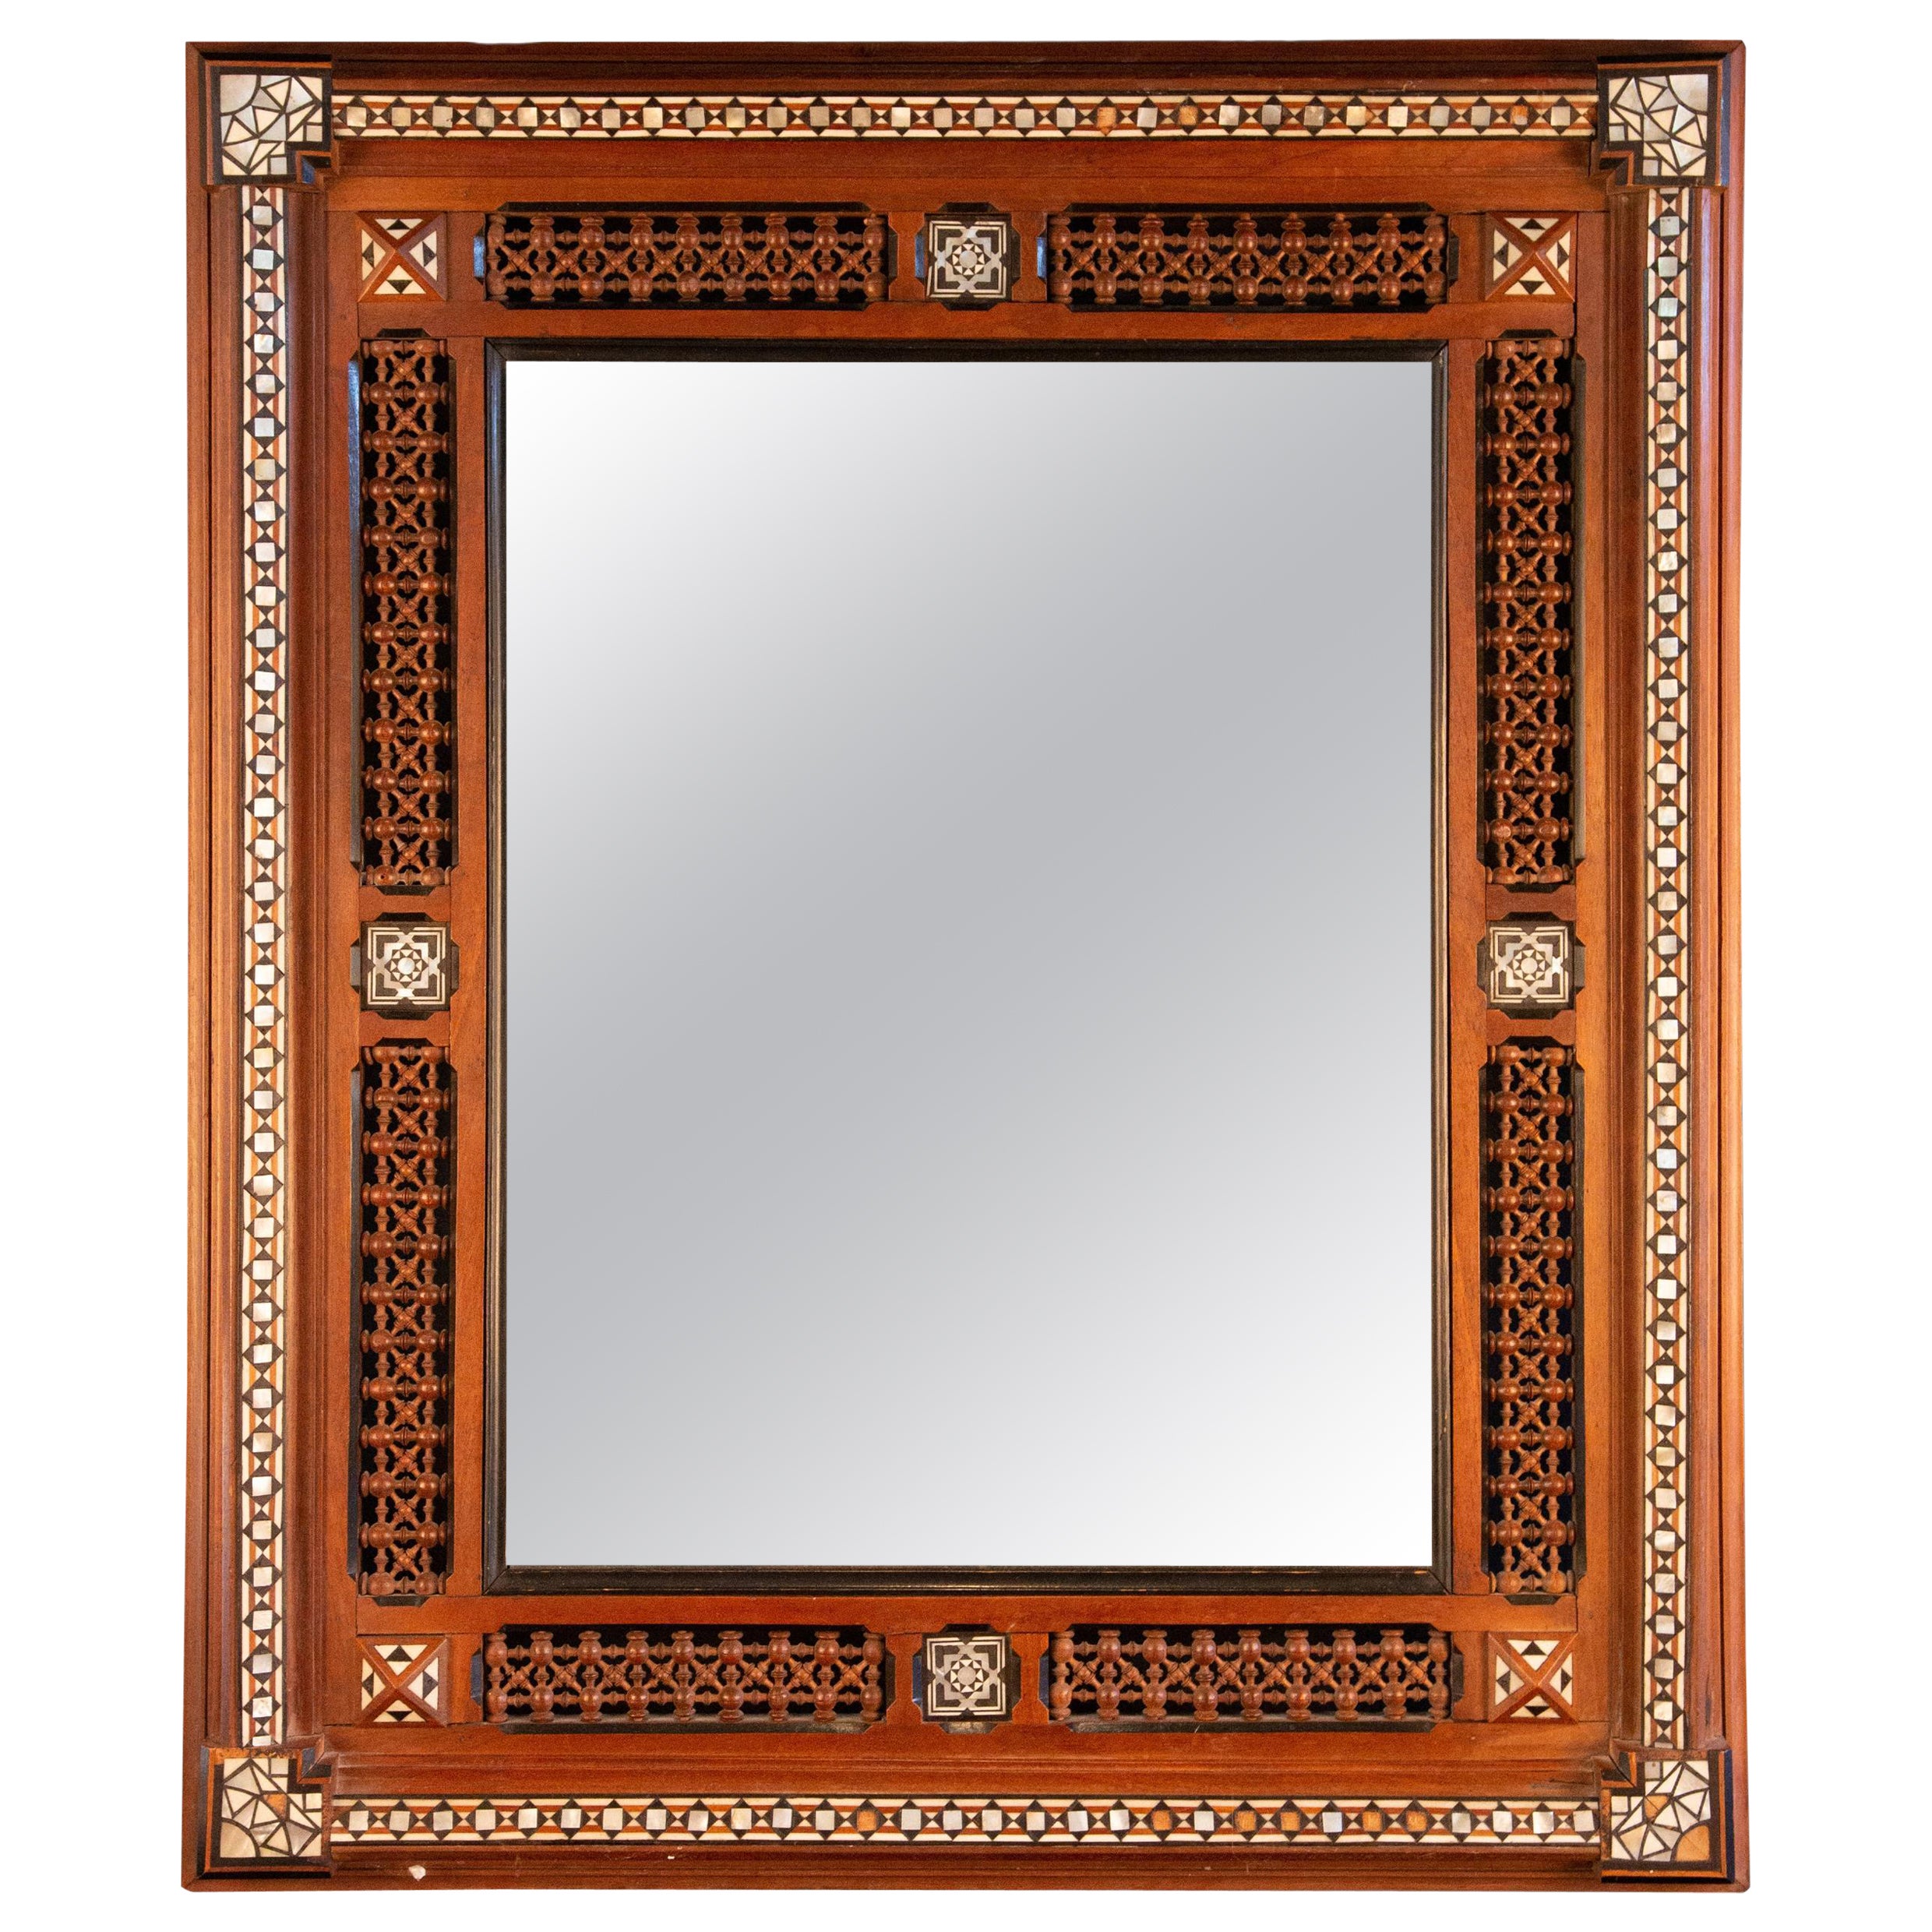 Early 20th Century Damascus Inlaid Bone and Wood Wall Mirror